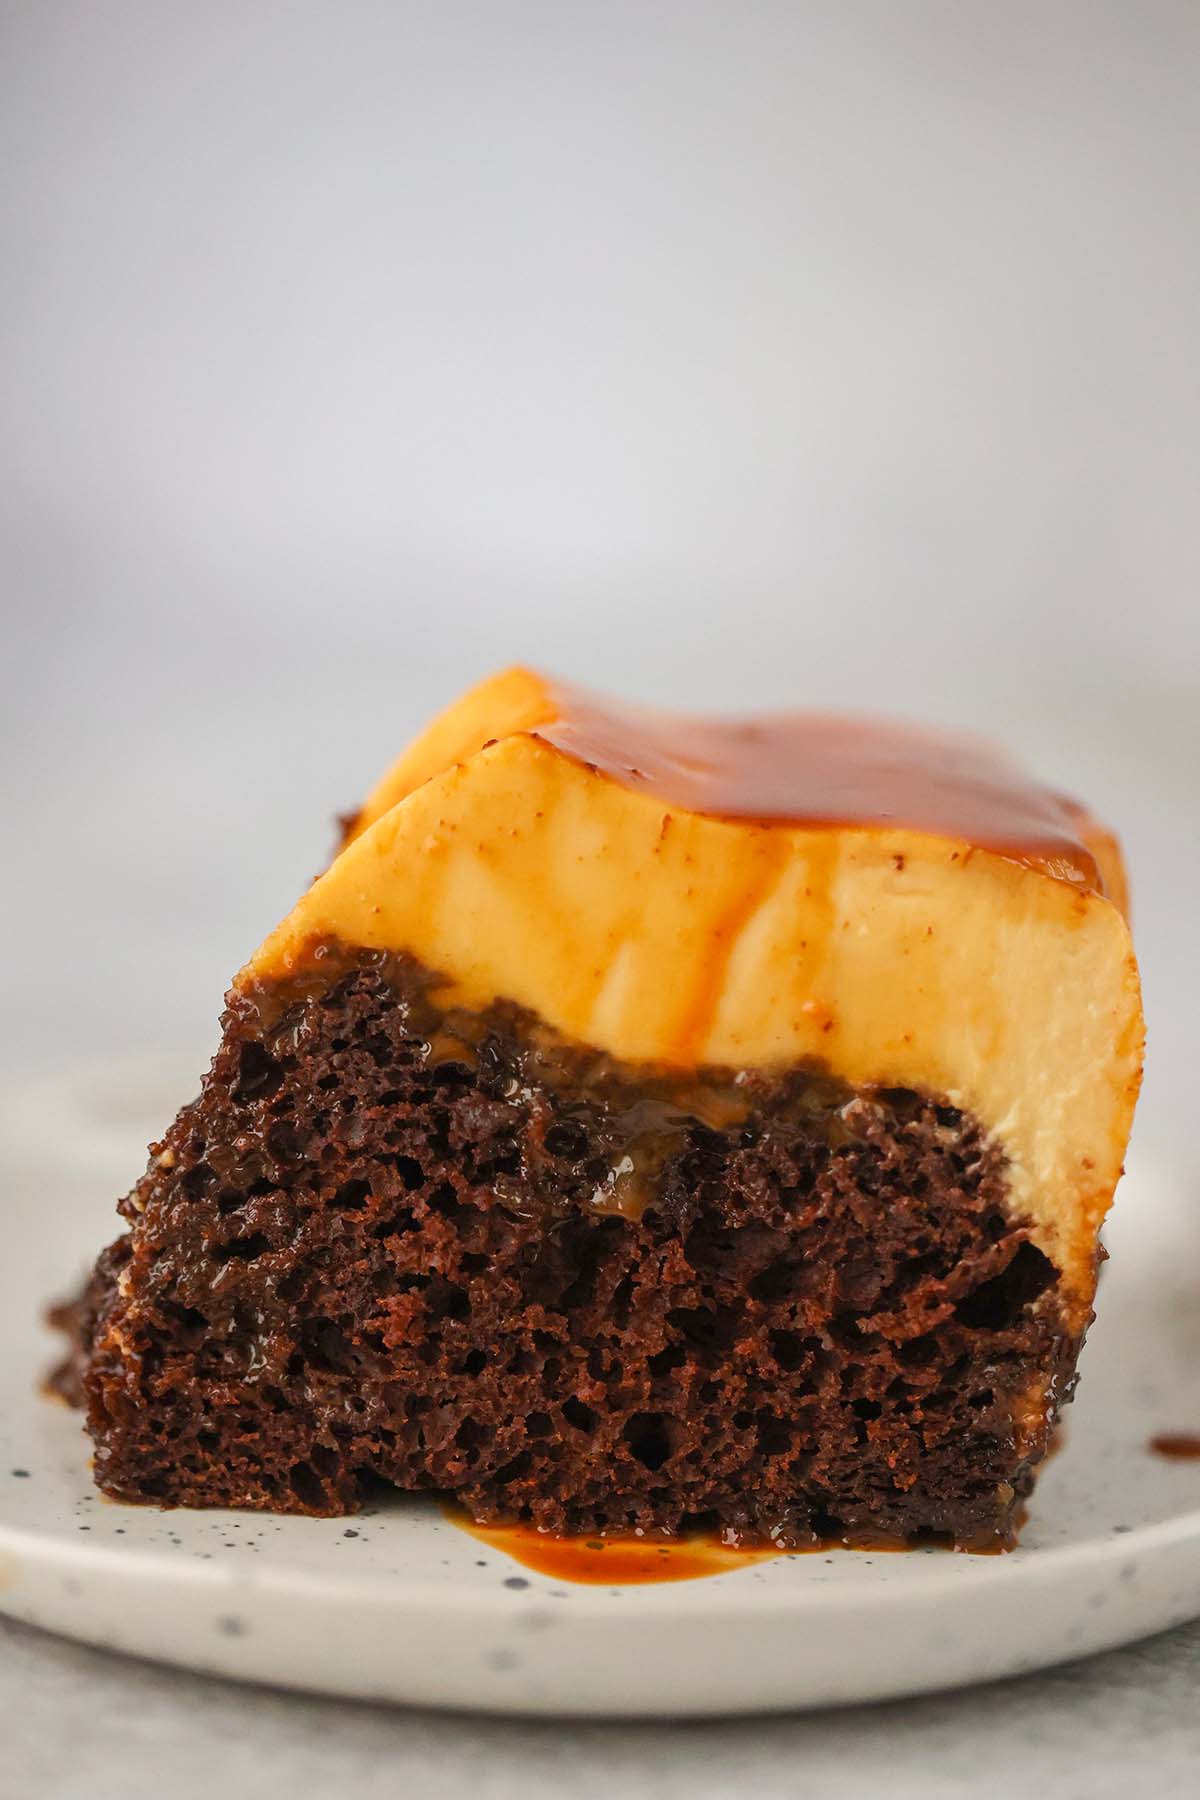 https://www.cookedbyjulie.com/wp-content/uploads/2022/10/chocoflan-eight.jpg